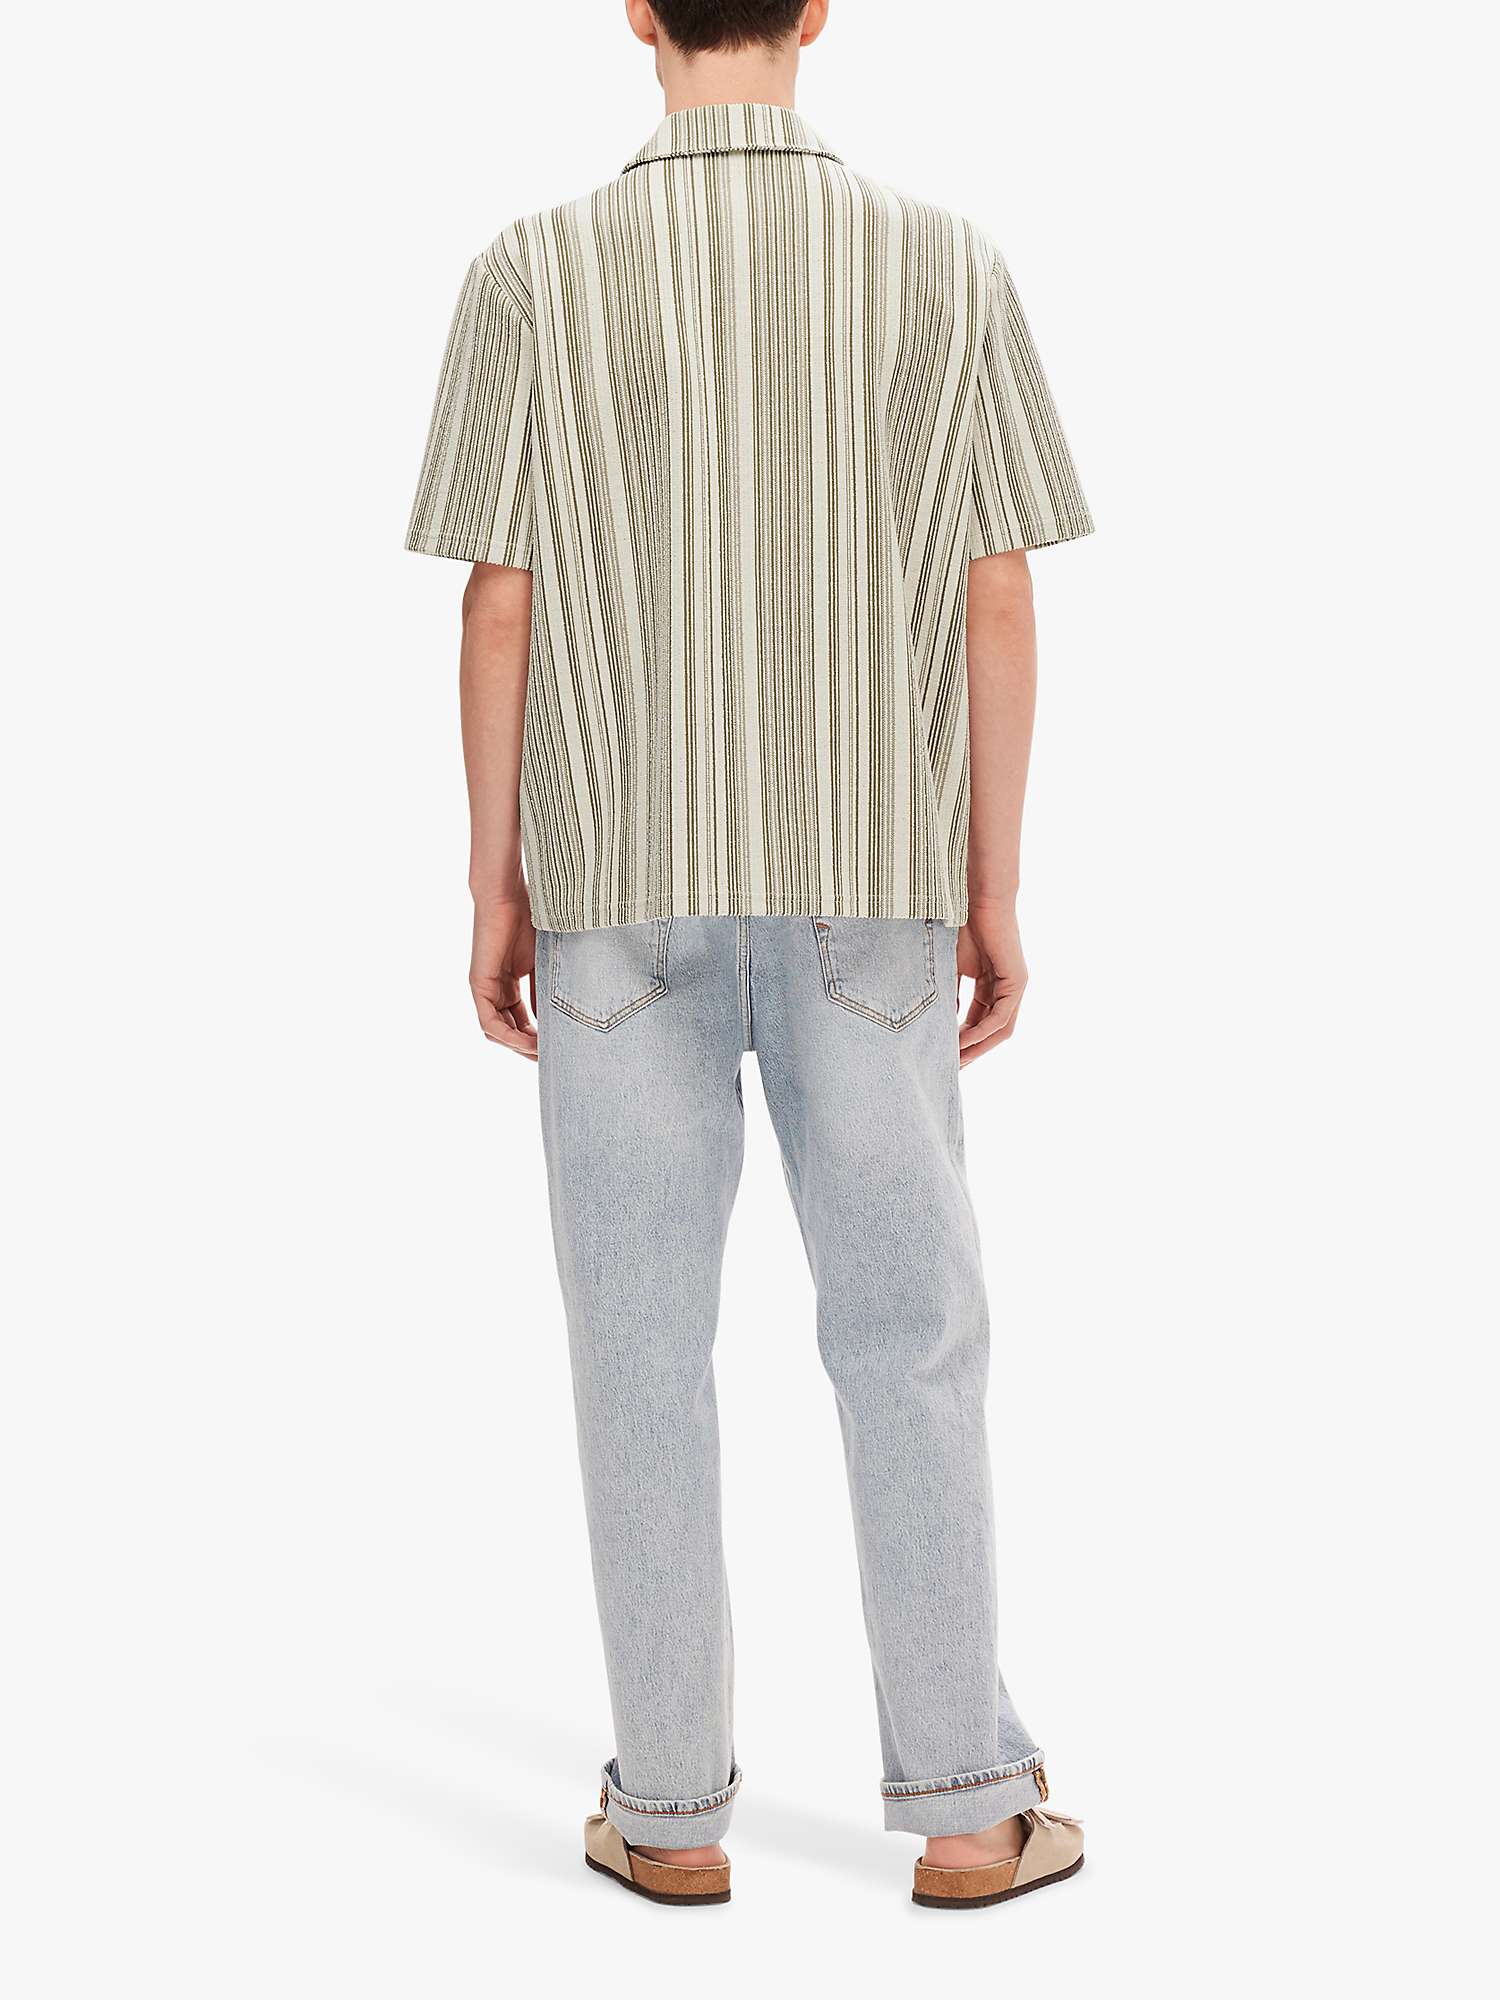 Buy SELECTED HOMME Knitted Boxy Short Sleeve Shirt, Green/Multi Online at johnlewis.com